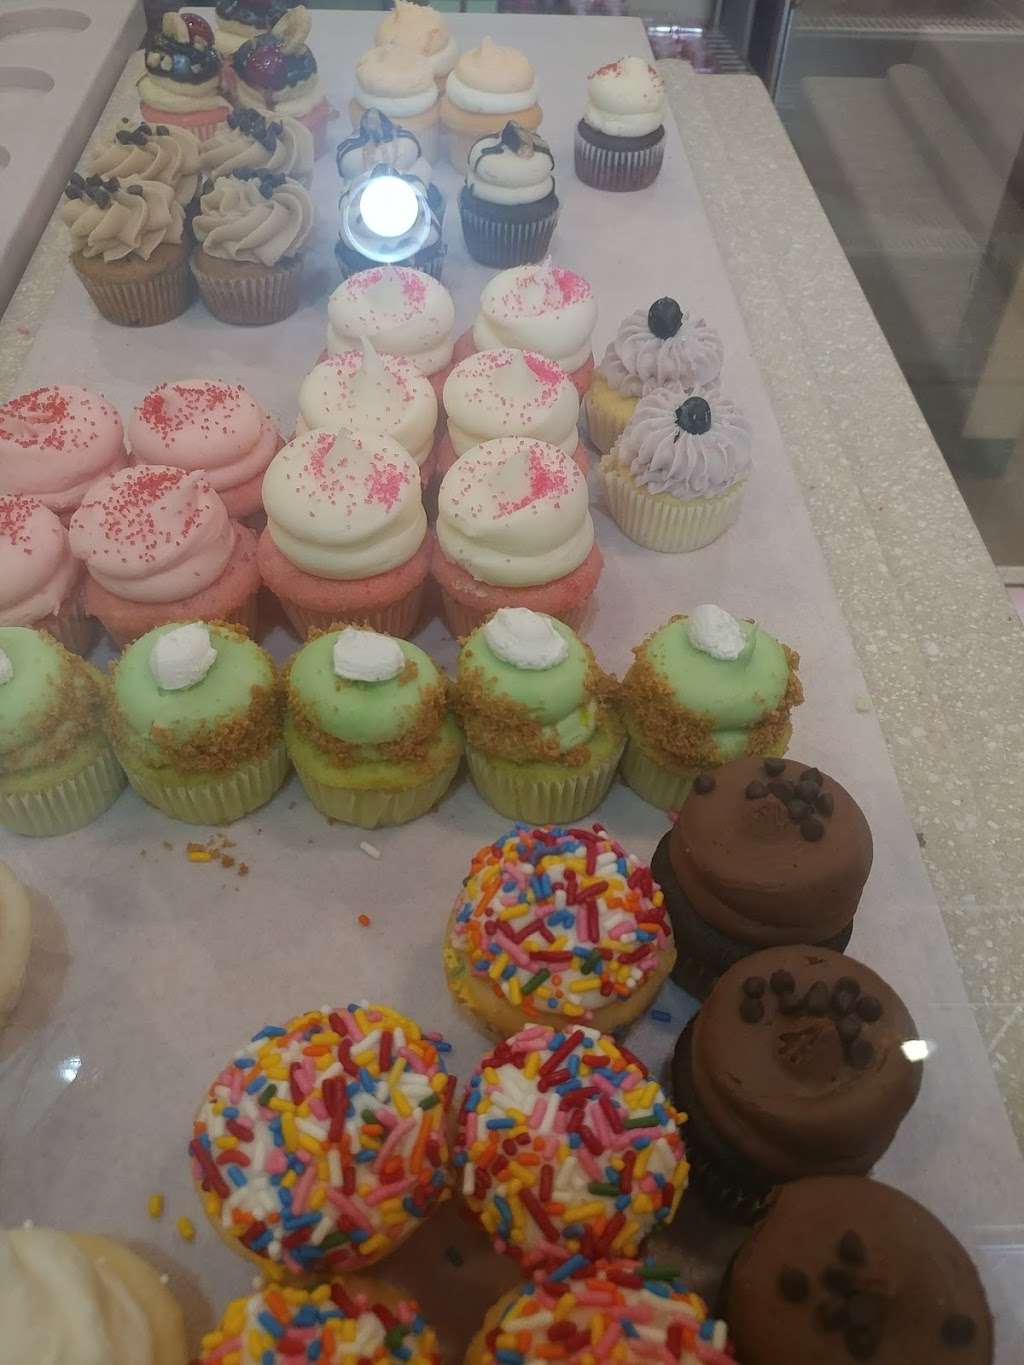 Gigis Cupcakes | 4747 Research Forest Dr Suite 150, The Woodlands, TX 77381, USA | Phone: (281) 651-5637